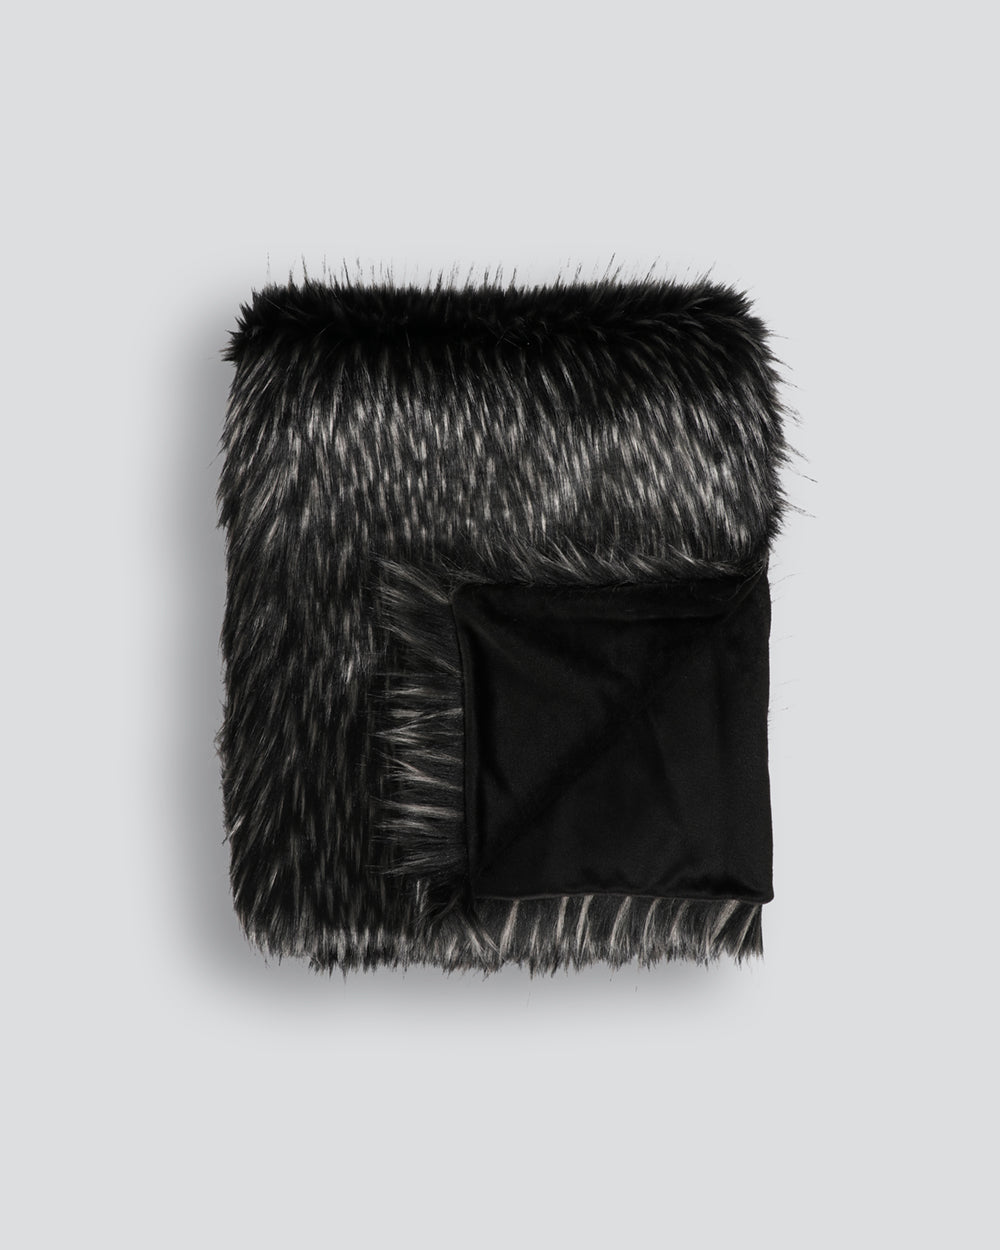 Heirloom Ebony Plume Throw Rug Blanket in Faux Fur is available from Make Your House A Home Premium Stockist. Furniture Store Bendigo, Victoria. Australia Wide Delivery.